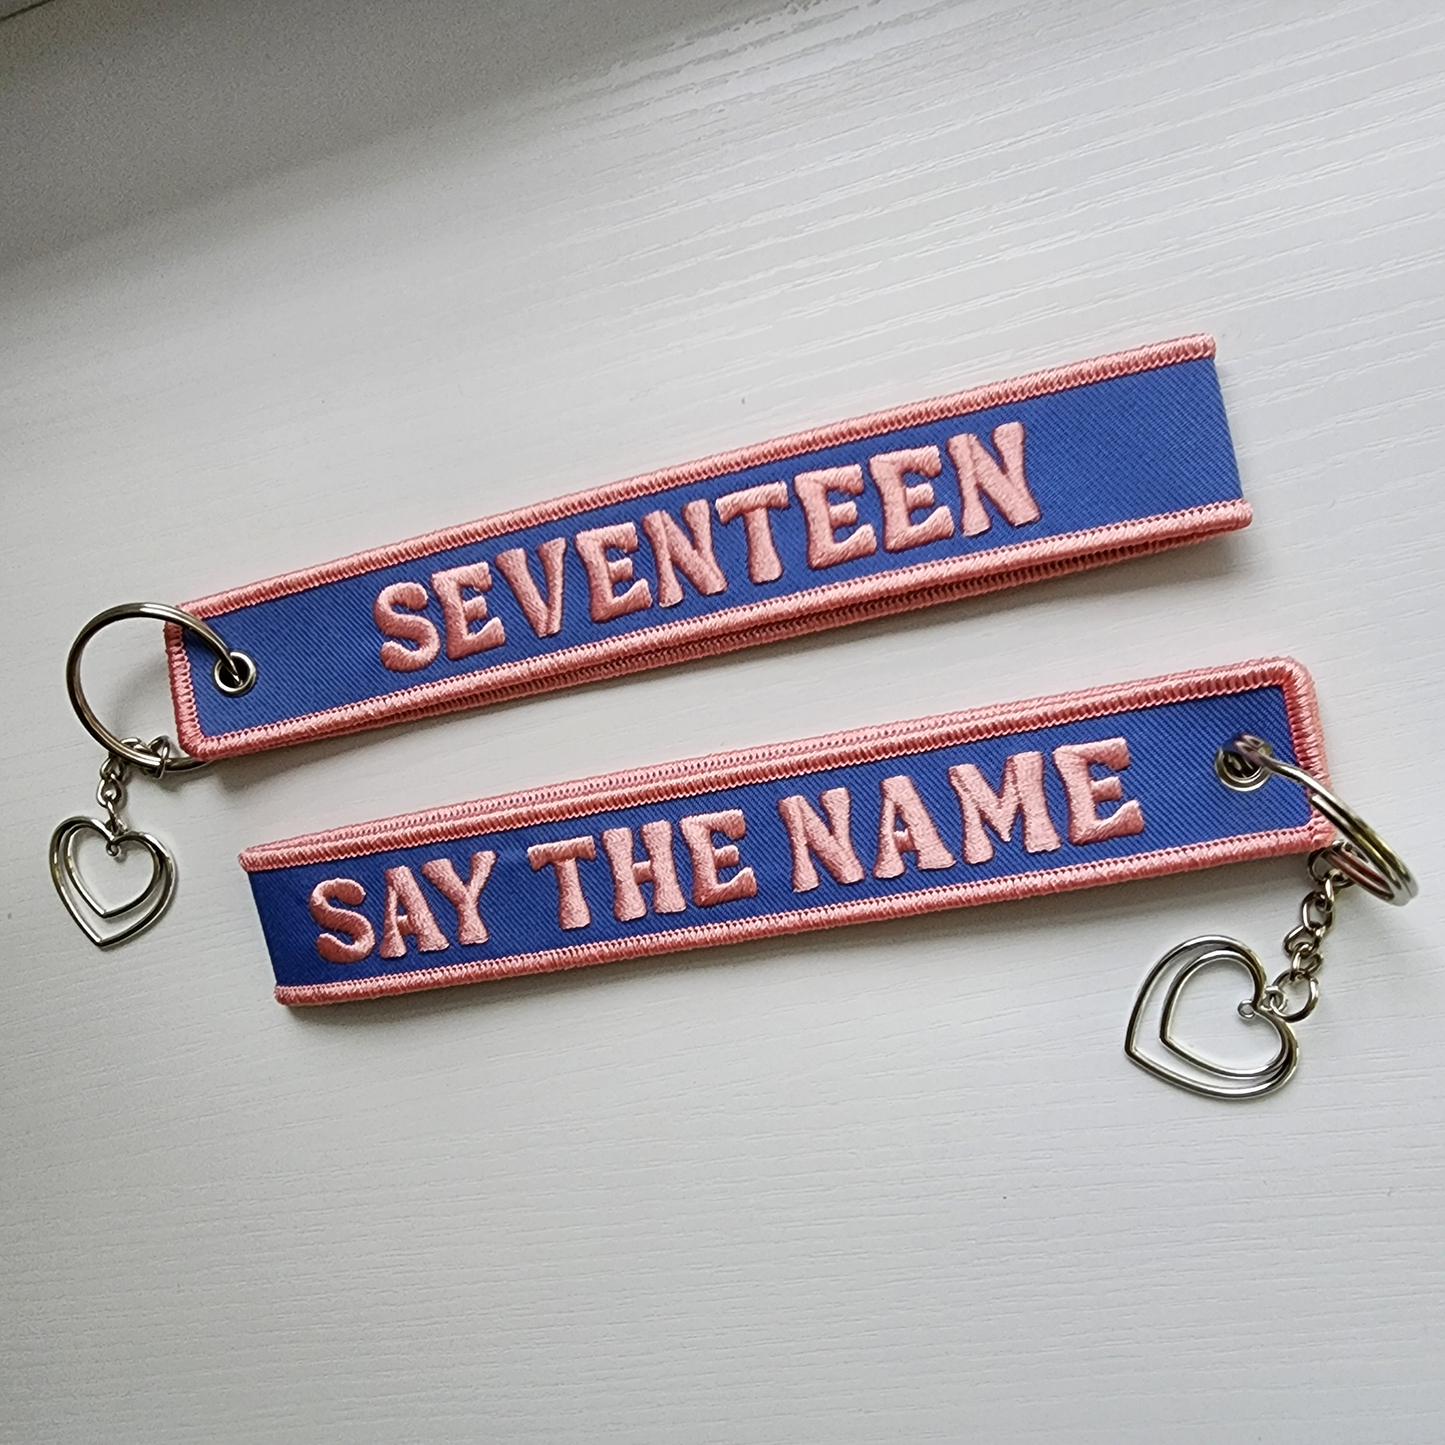 Seventeen - "Say the Name" Embroidered Keychain Wristlet